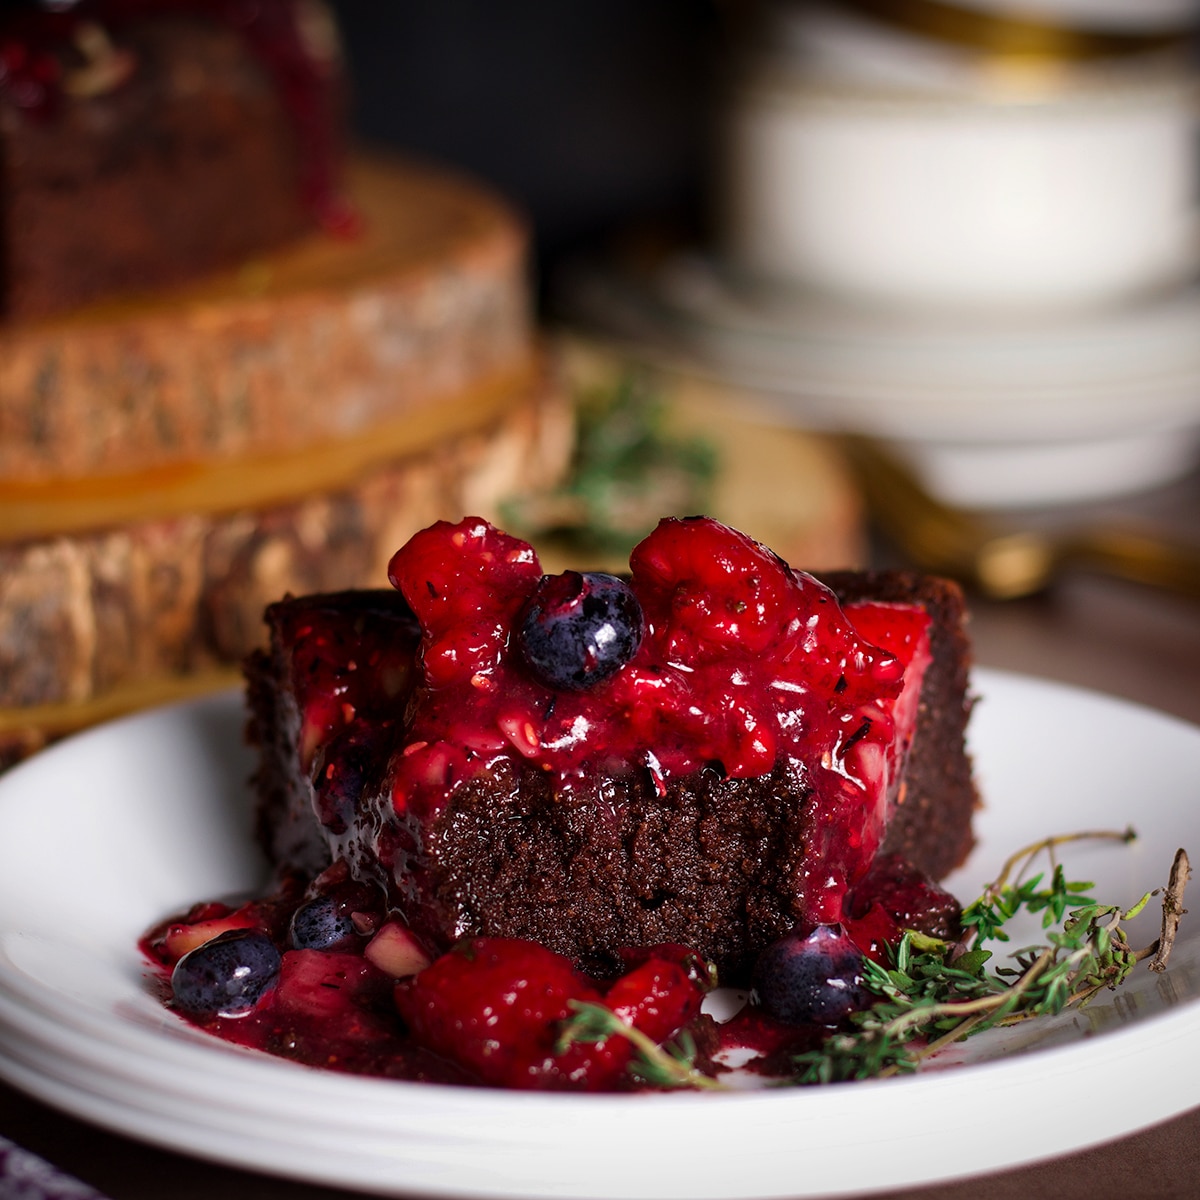 A slice of chocolate ricotta cake covered in fresh berry sauce with a bite taken out of it.